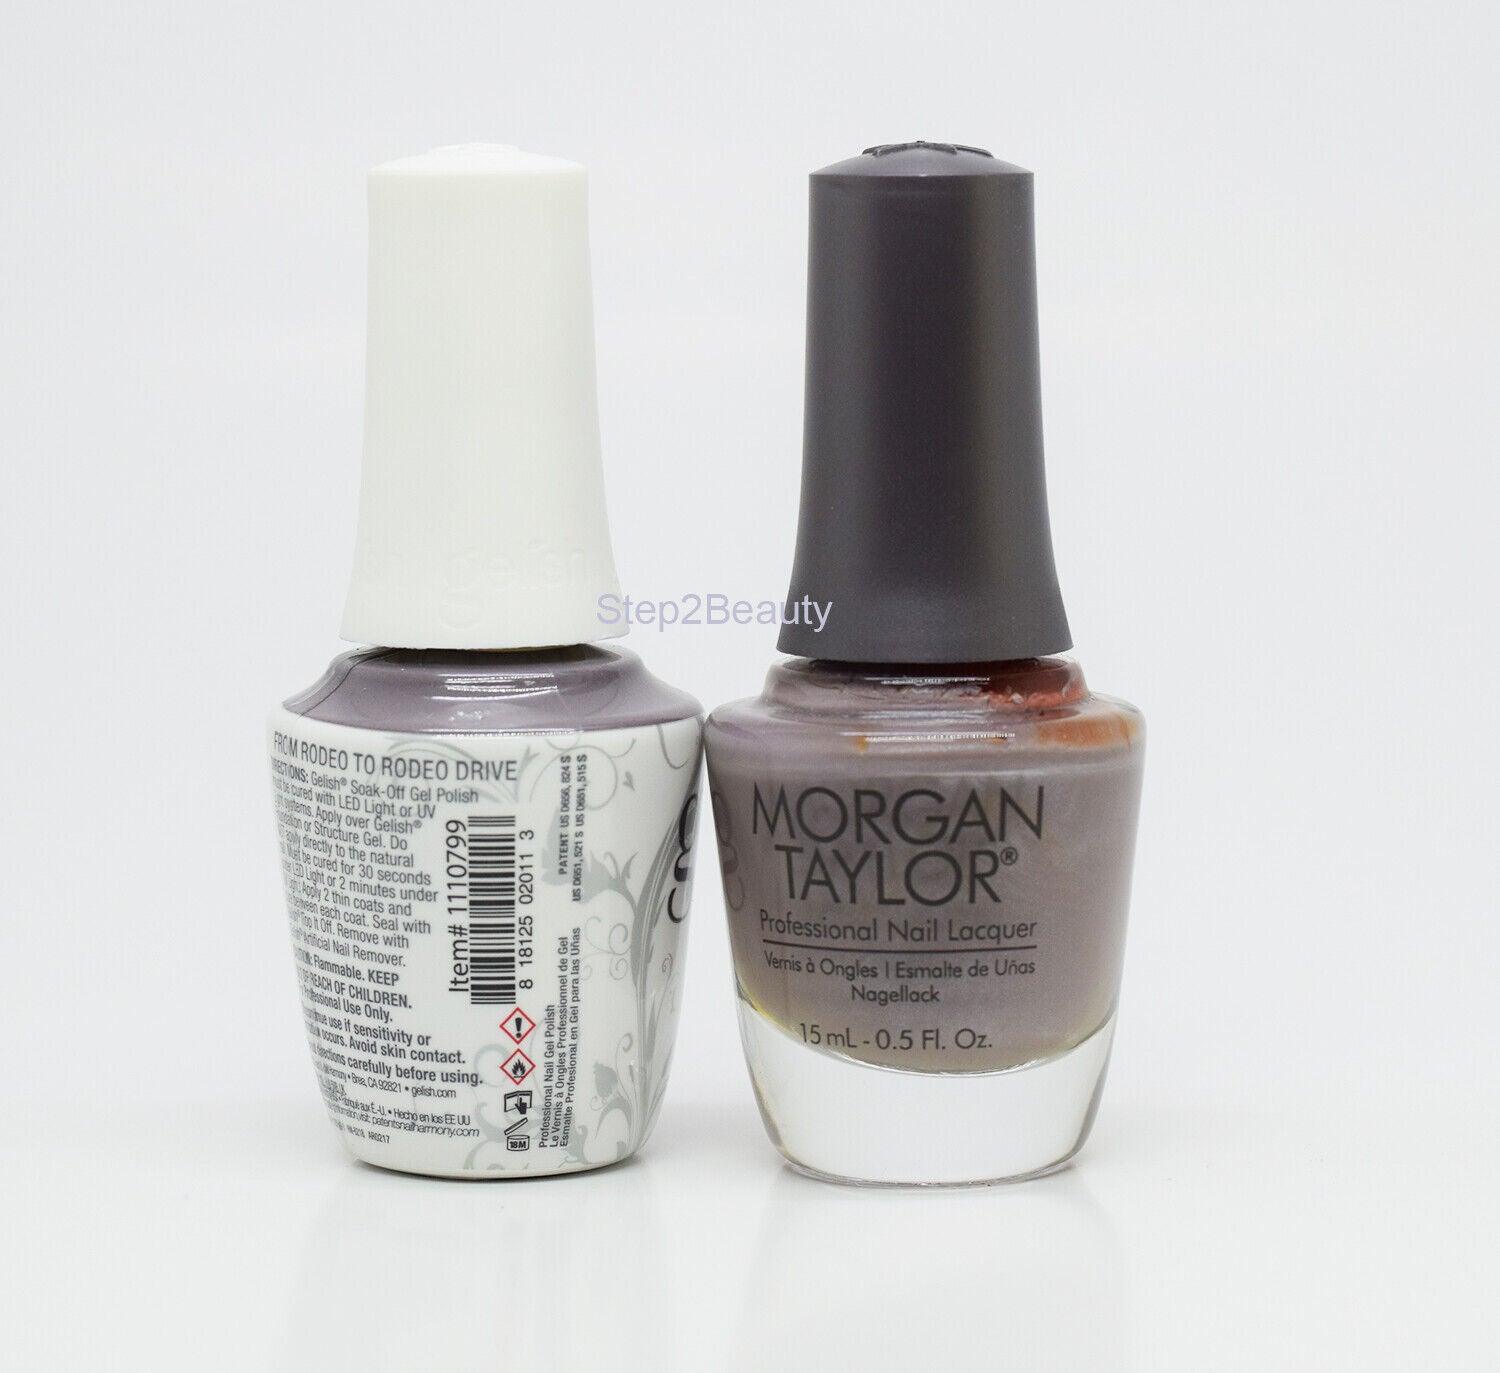 Gelish DUO Soak Off Gel Polish + Morgan Taylor Lacquer #799 From Rodeo to Rodeo